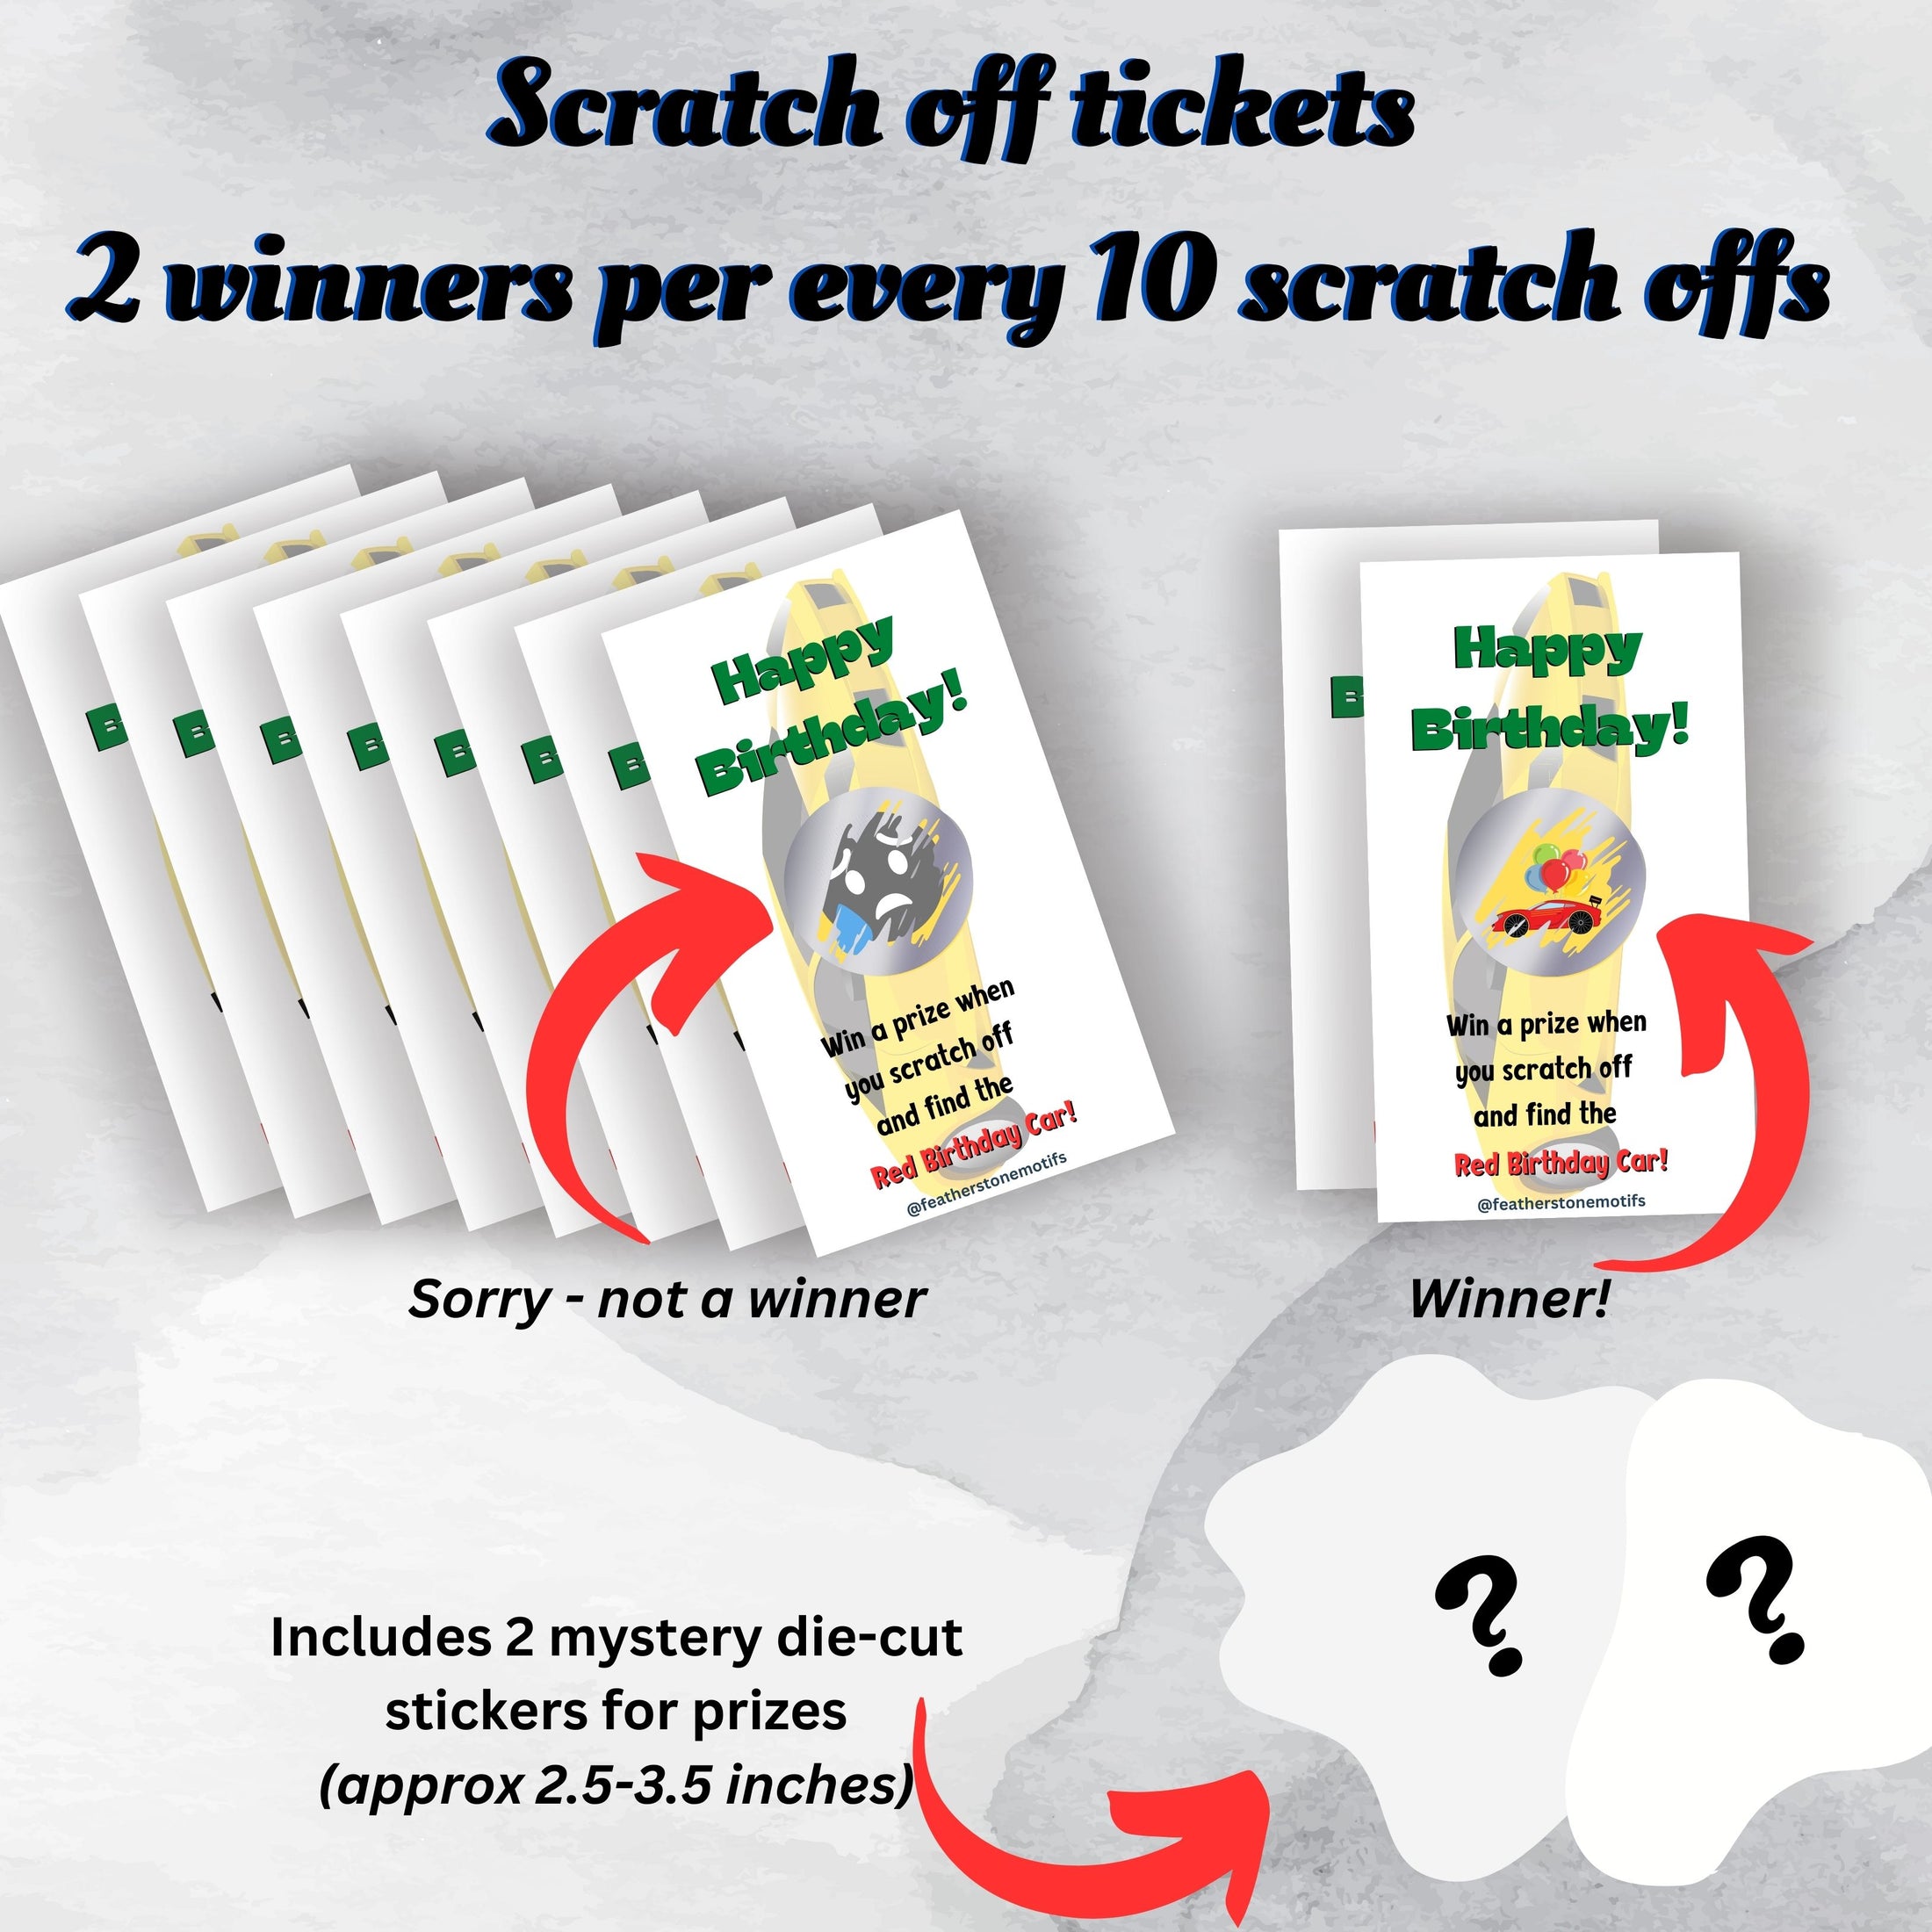 This image shows the scratch-off cards highlighting the winning and non-winning images. Each set of 10 scratch-off cards includes 2 mystery die-cut stickers as prizes.